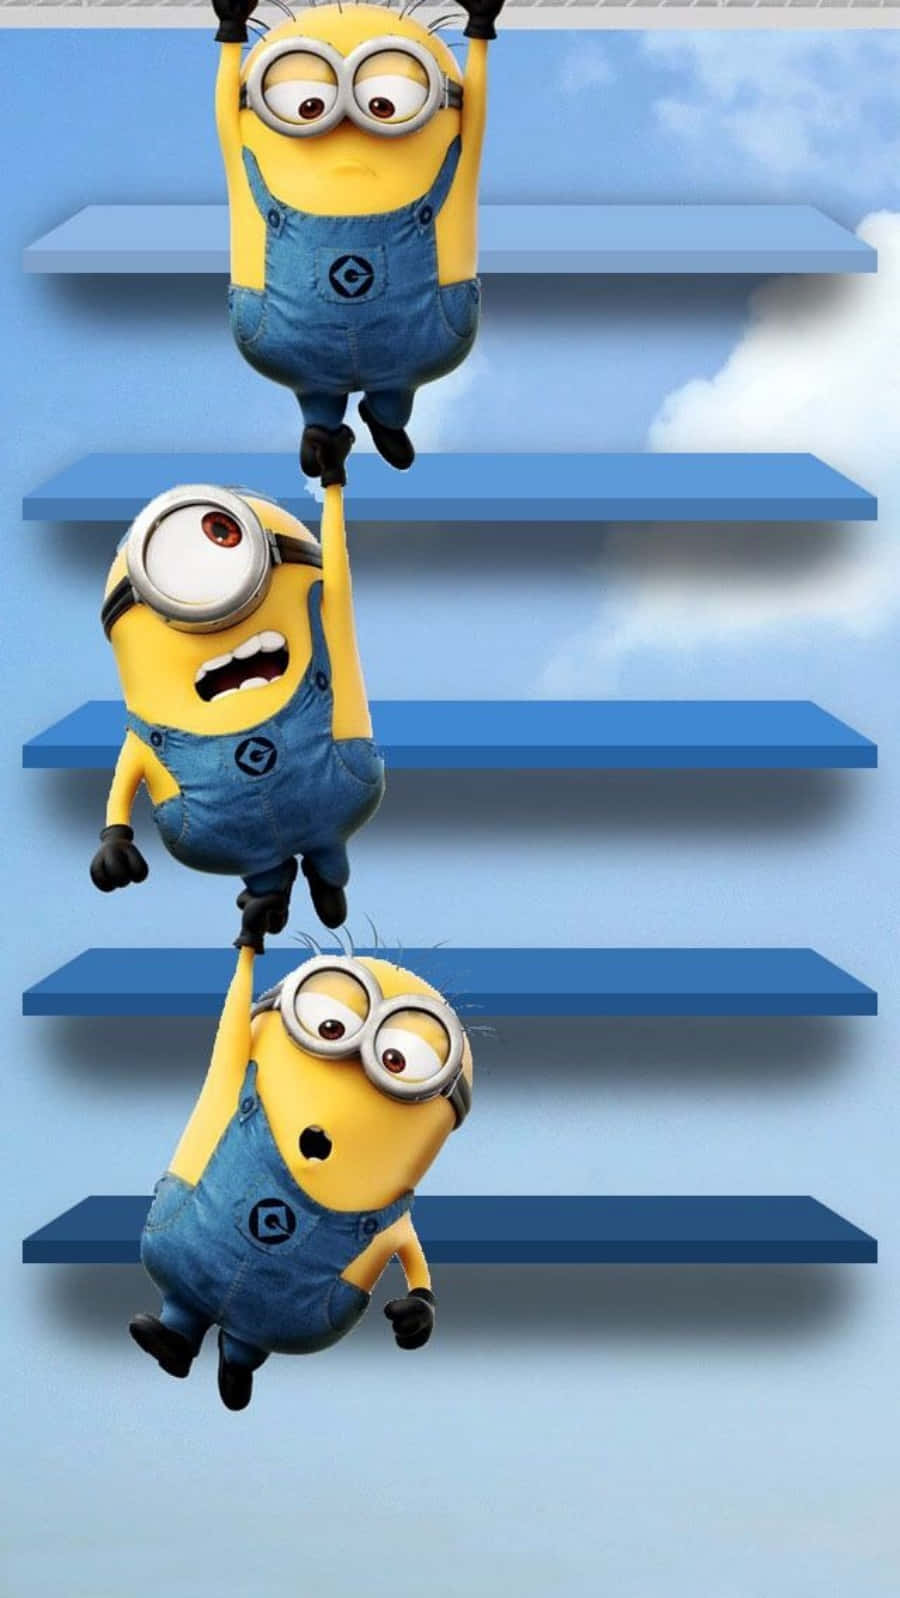 Hanging Despicable Me Minion Iphone Wallpaper